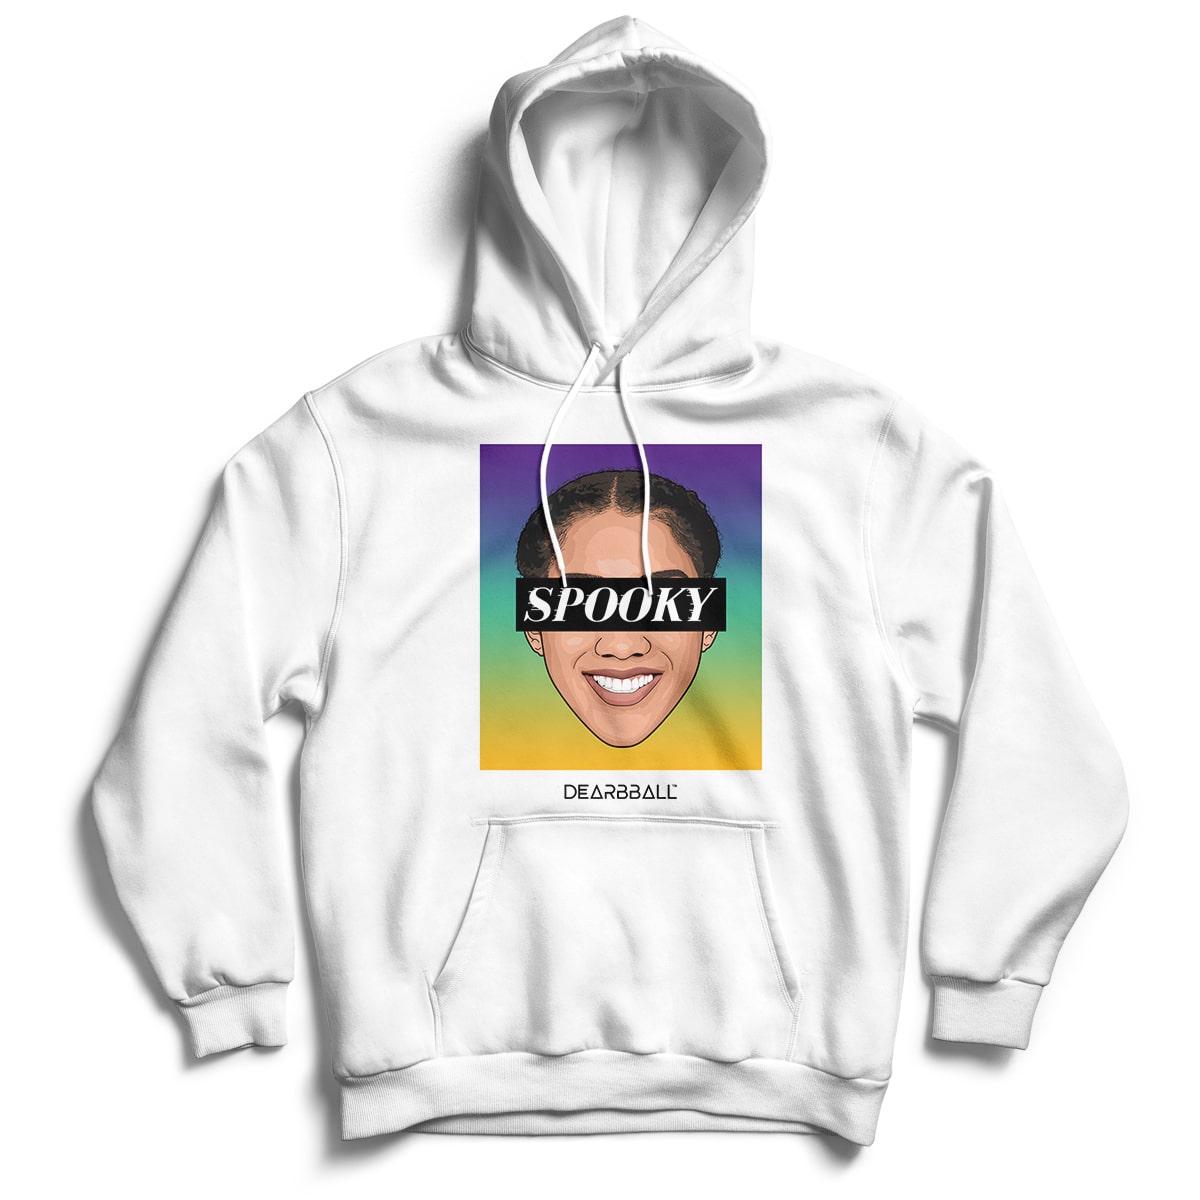 Hoodie DearBBall Gabby Williams - SPOOKY Sparks Gradient Supremacy